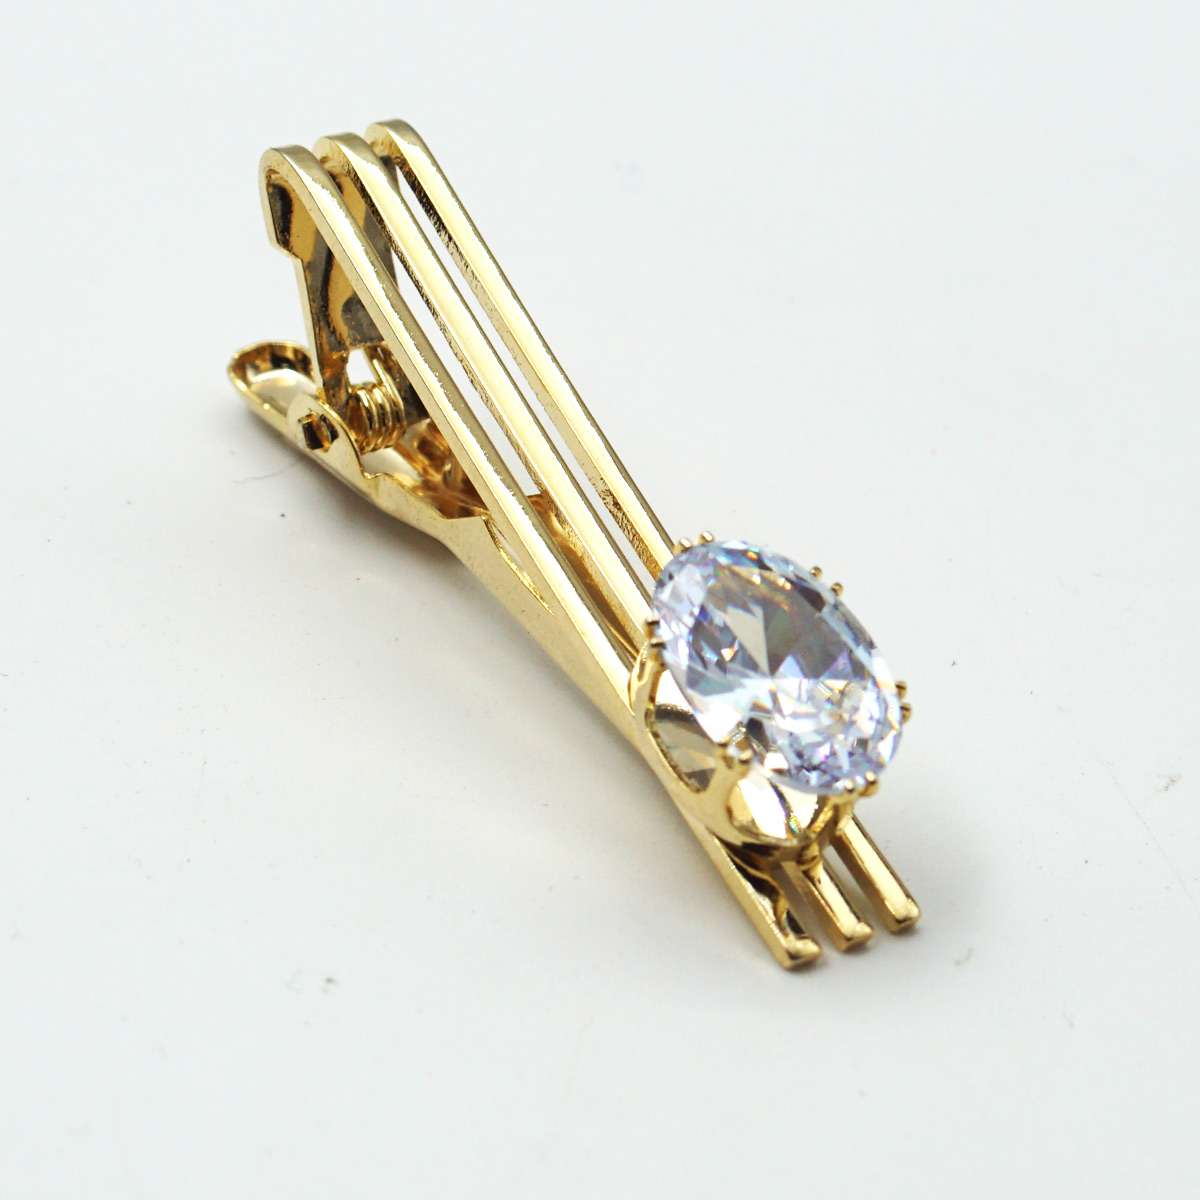 penhouse.in Gold Color With Thilagam Shape Stone Tie Pin SKU 87311